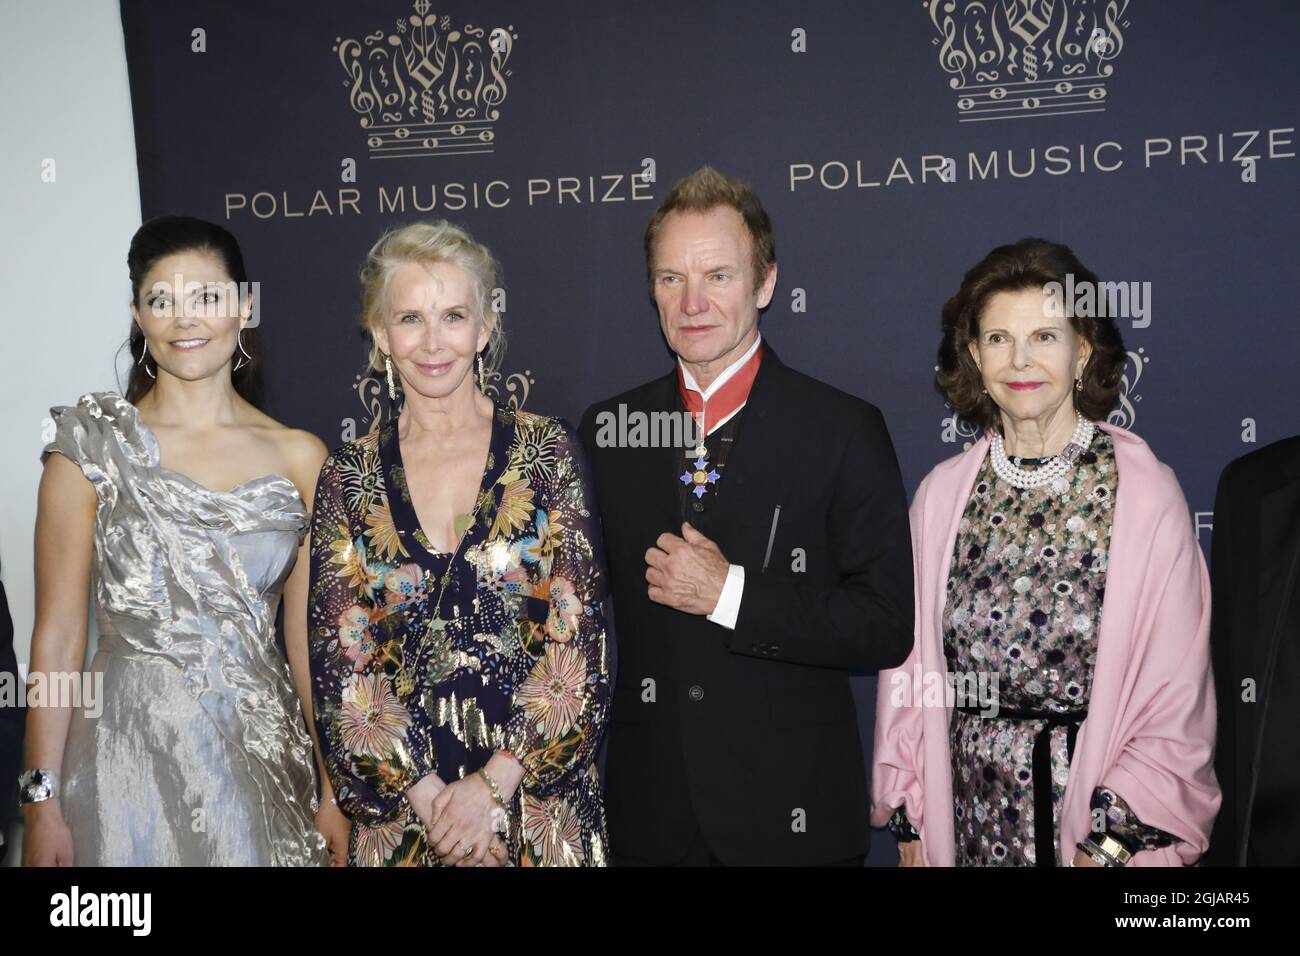 STOCKHOLM 2017-06-15 Crown princess Victoria, Trudie Styler, Sting and  Queen Silvia at the Polar